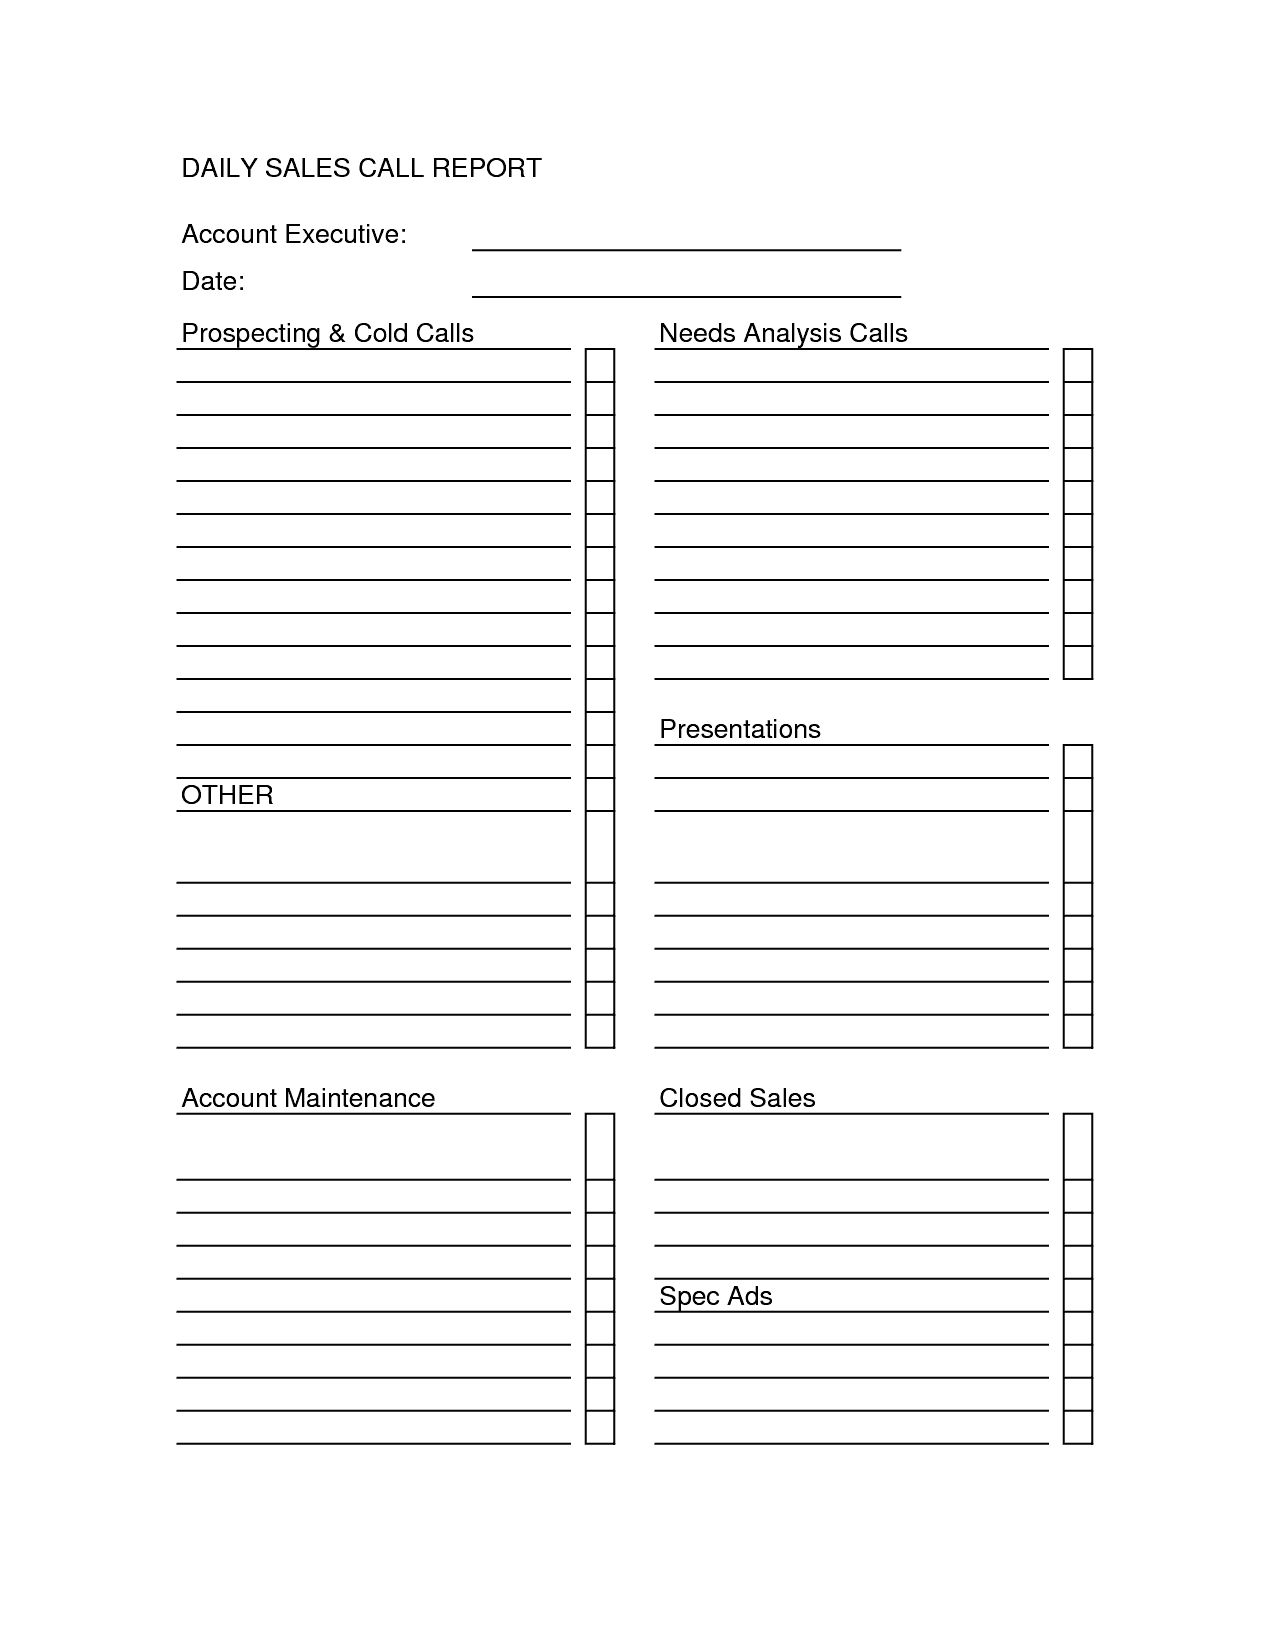 Sales Call Report Templates - Word Excel Fomats With Sales Call Reports Templates Free